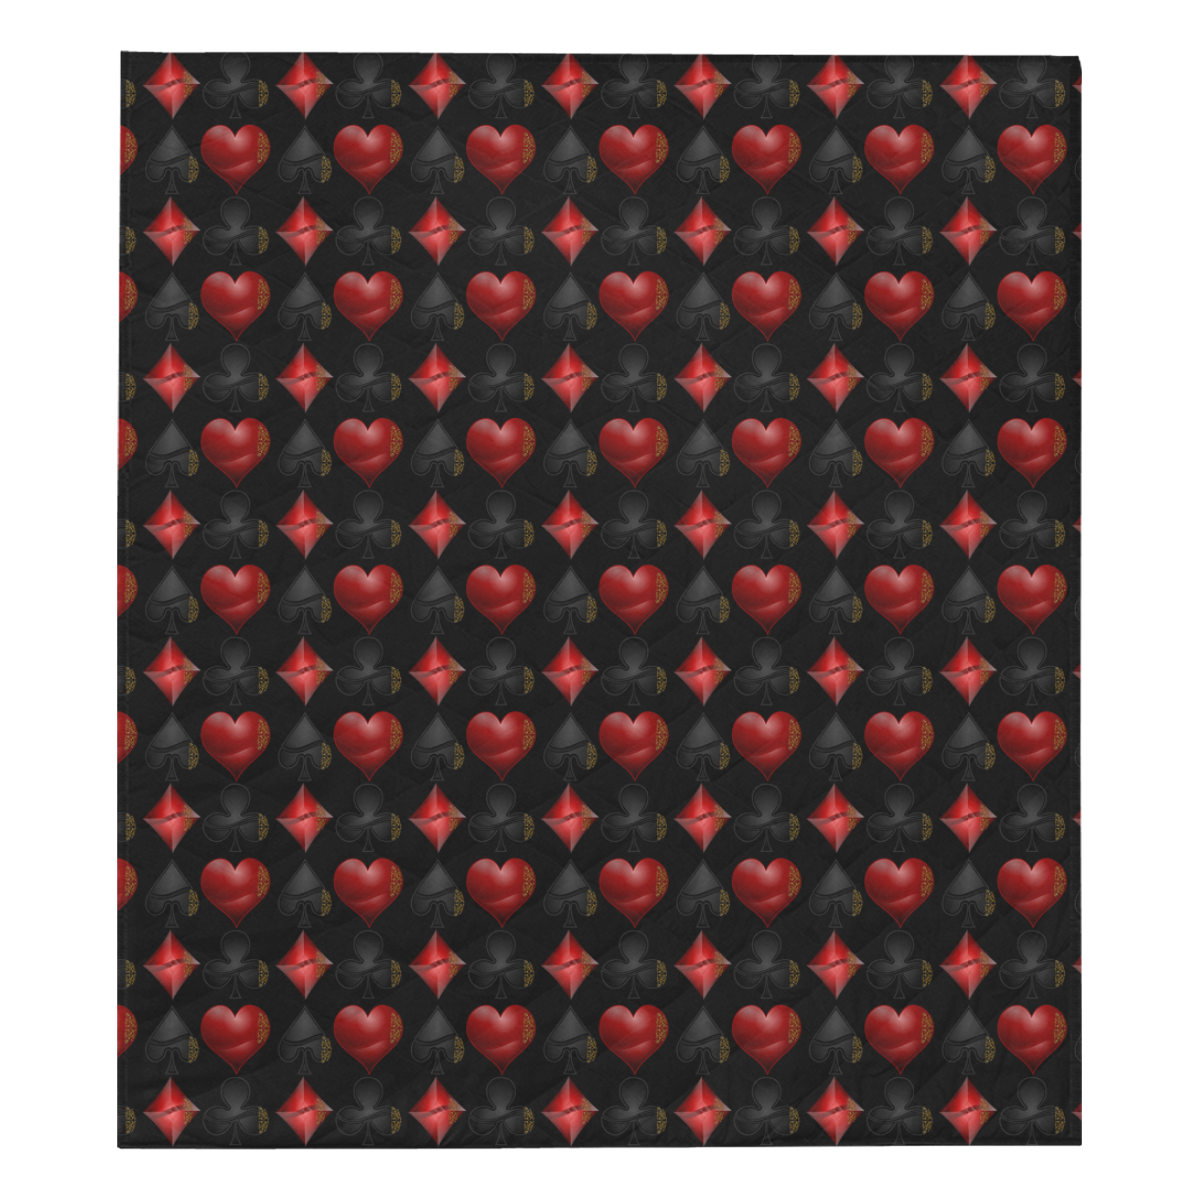 Las Vegas Black and Red Casino Poker Card Shapes on Black Quilt 70"x80"